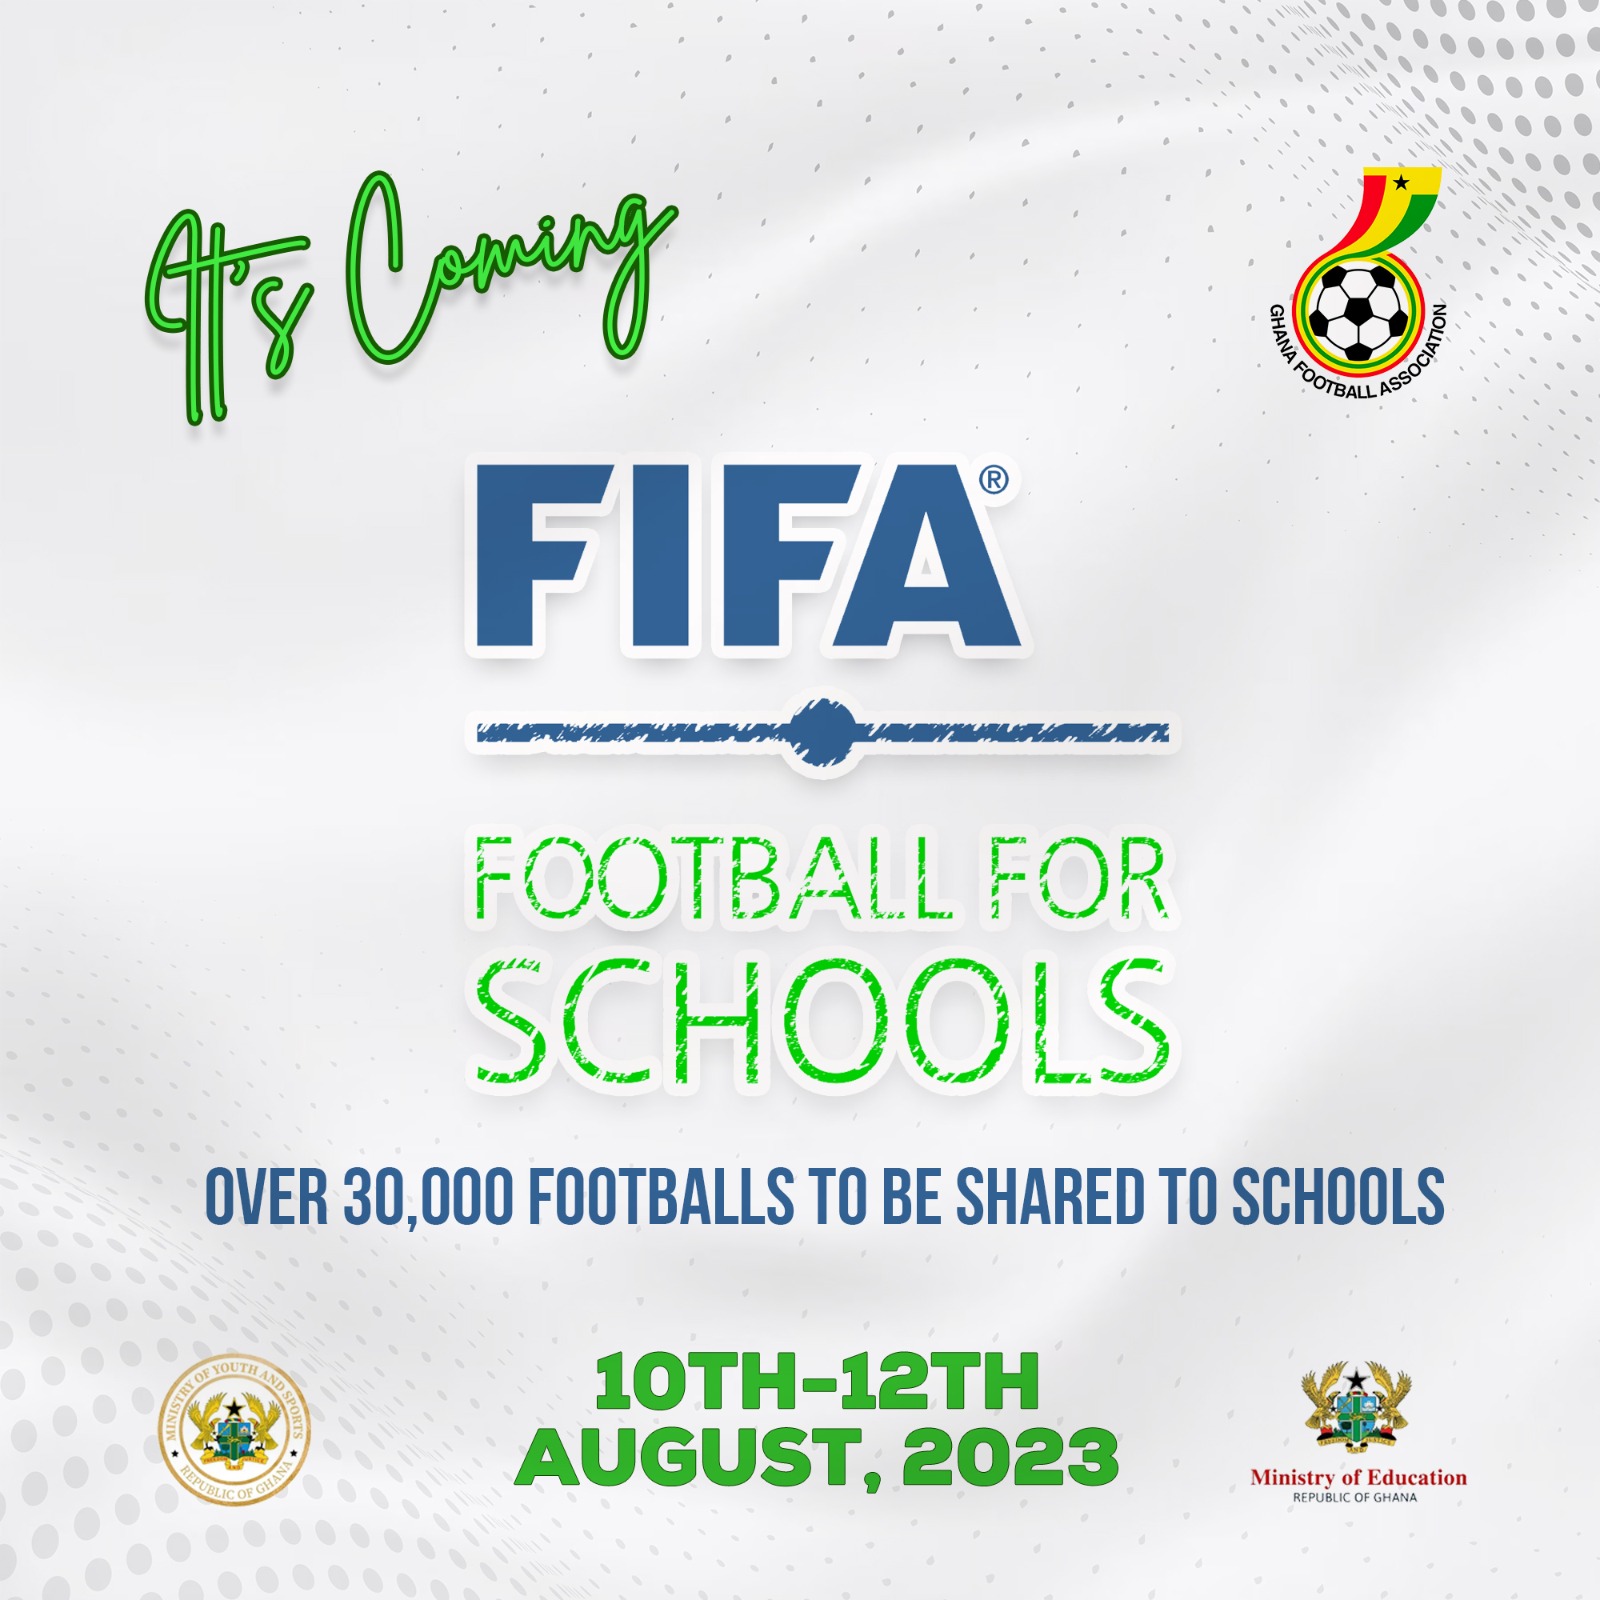 FIFA  Football for Schools project to be launched on August 12